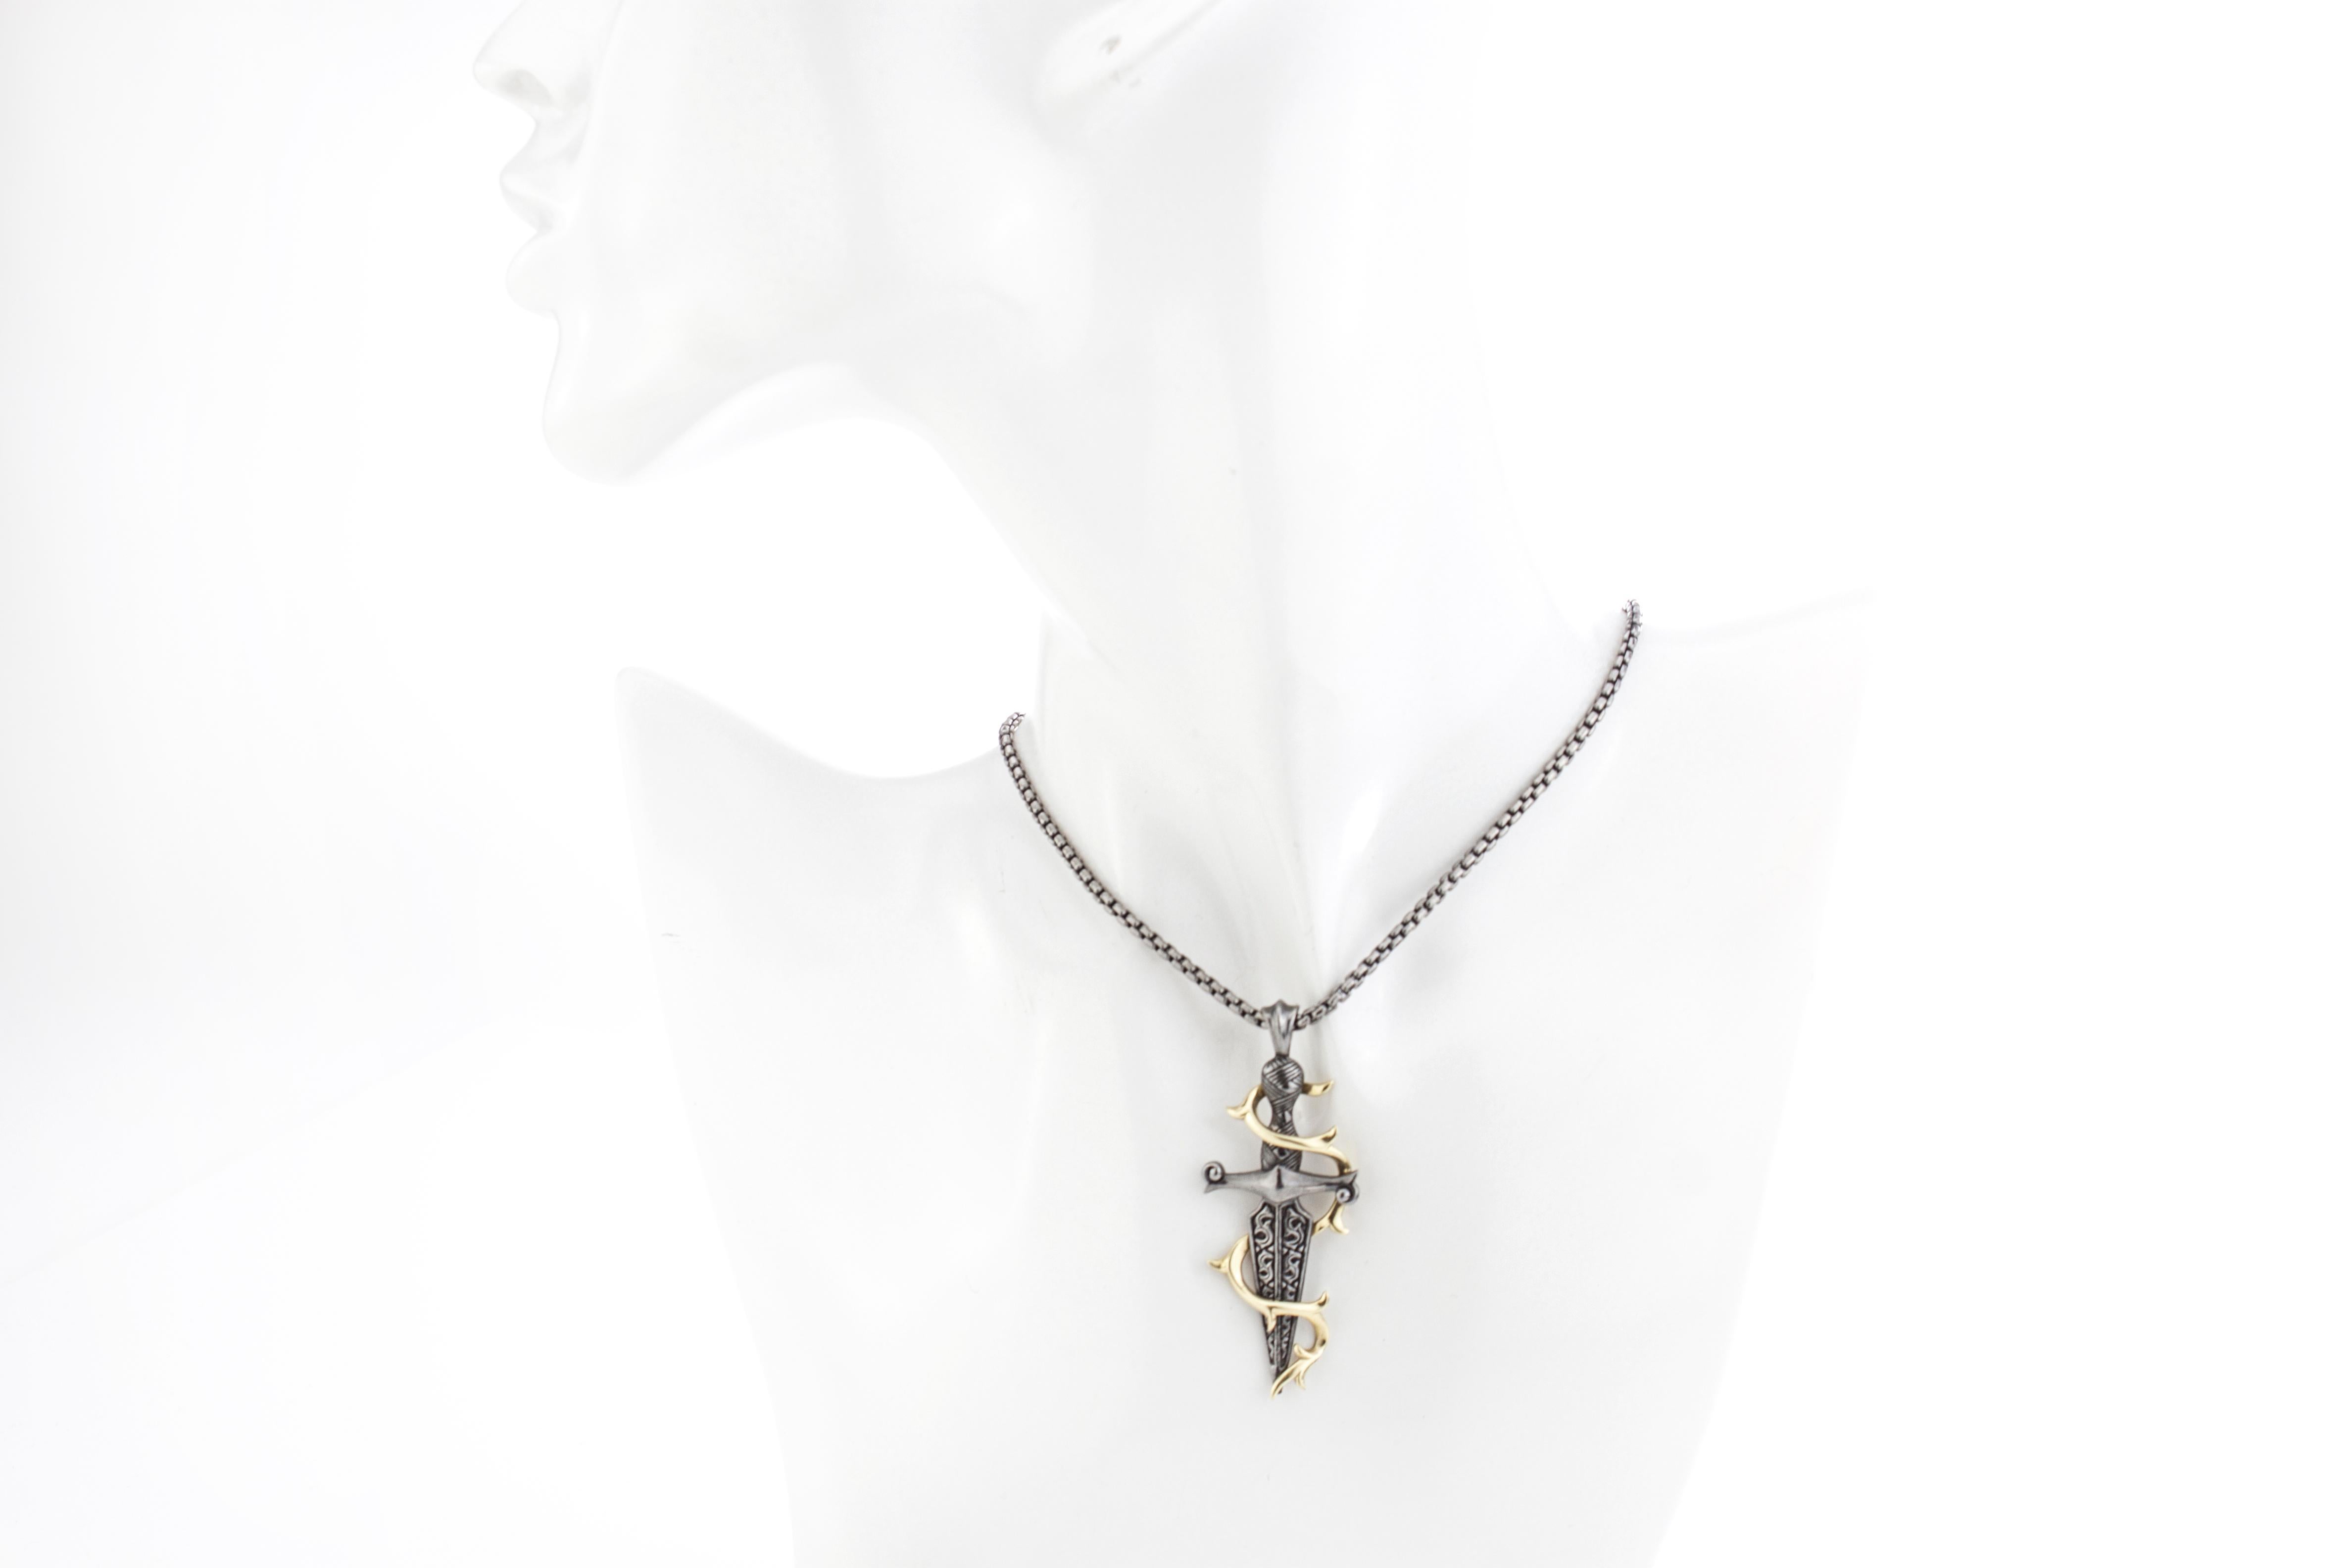 Stephen Webster 18kt gold and silver dagger necklace
Designer / Maker: Stephen Webster
Made in 2000's
Fully hallmarked.

Dimensions -
Necklace Length: 75 cm
Total Weight: 35 grams

Condition: Pre-owned, excellent condition.